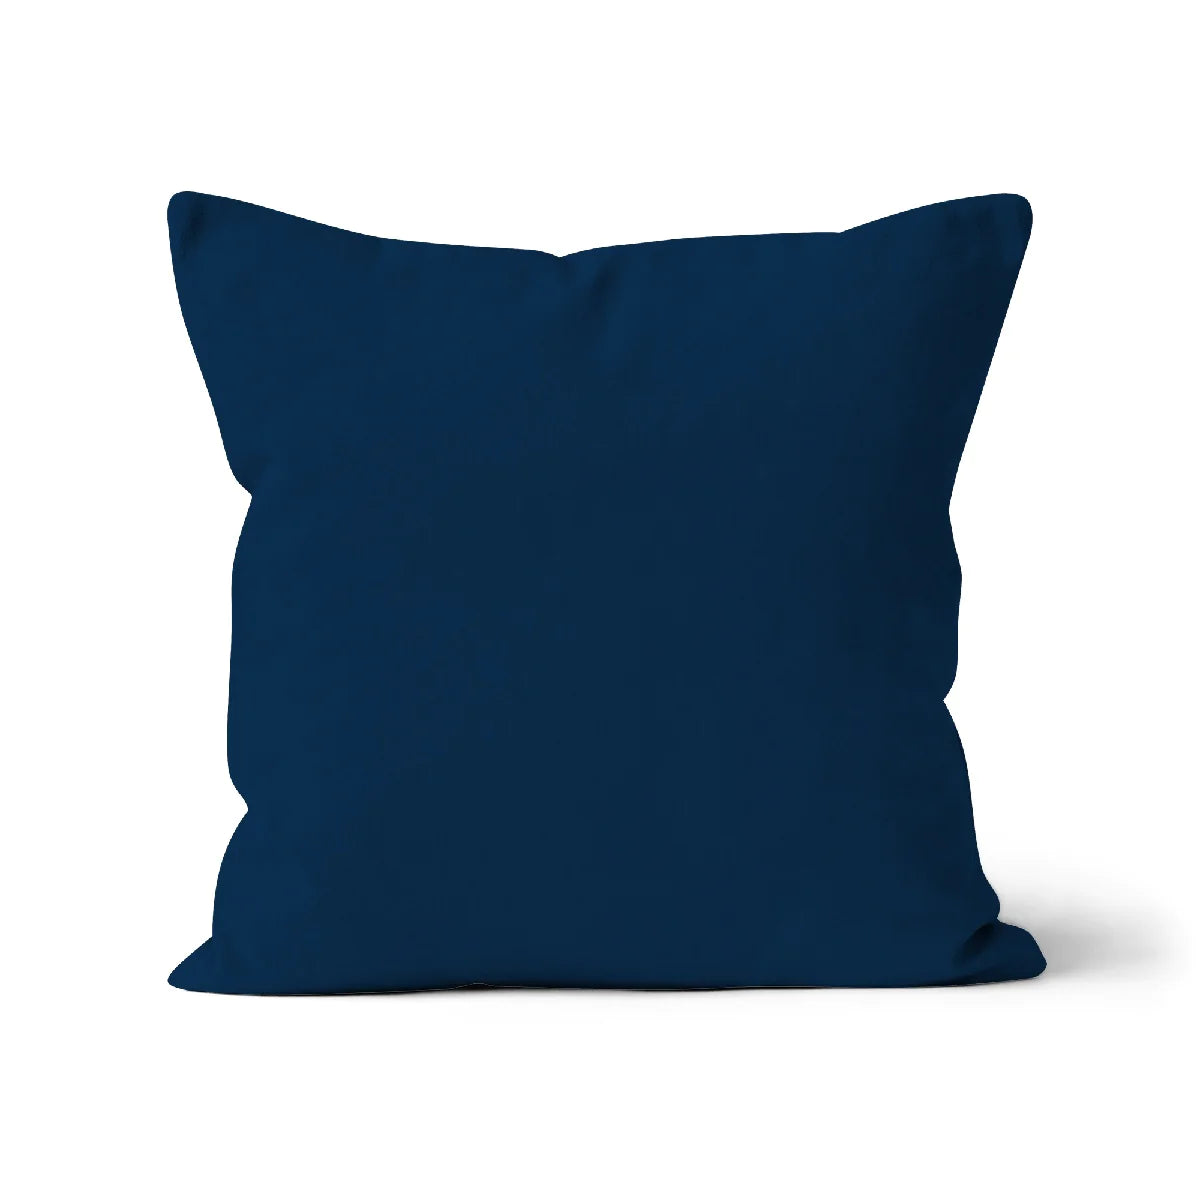 Dark blue cotton cushion cover. Navy blue cushion cover. Dark blue pillow cover. Organic cotton. Square cushion cover. Unfilled cushion. Organic cotton cushion. Made in the UK. British-Made. Sustainable homeware. Plain cushion covers. Eco-friendly cushion. High-quality cushion covers. Machine washable cushion covers. Plain colour cushion covers.